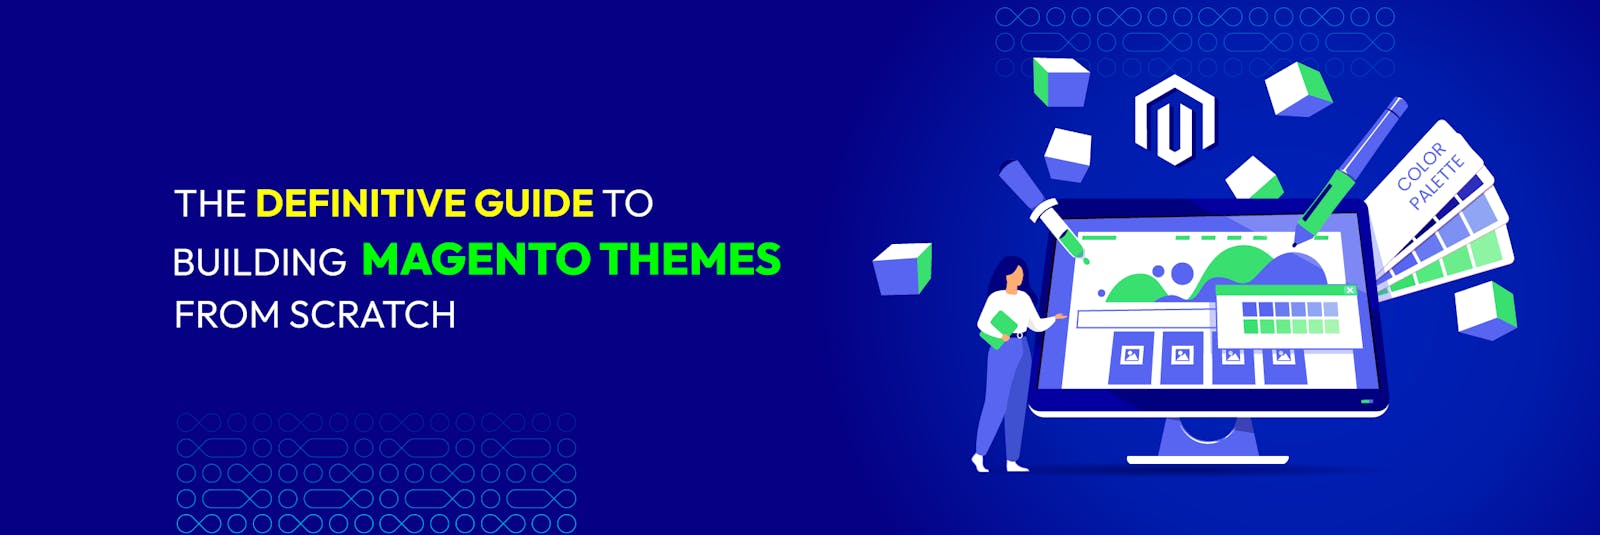 The Definitive Guide to Building Magento Themes from Scratch